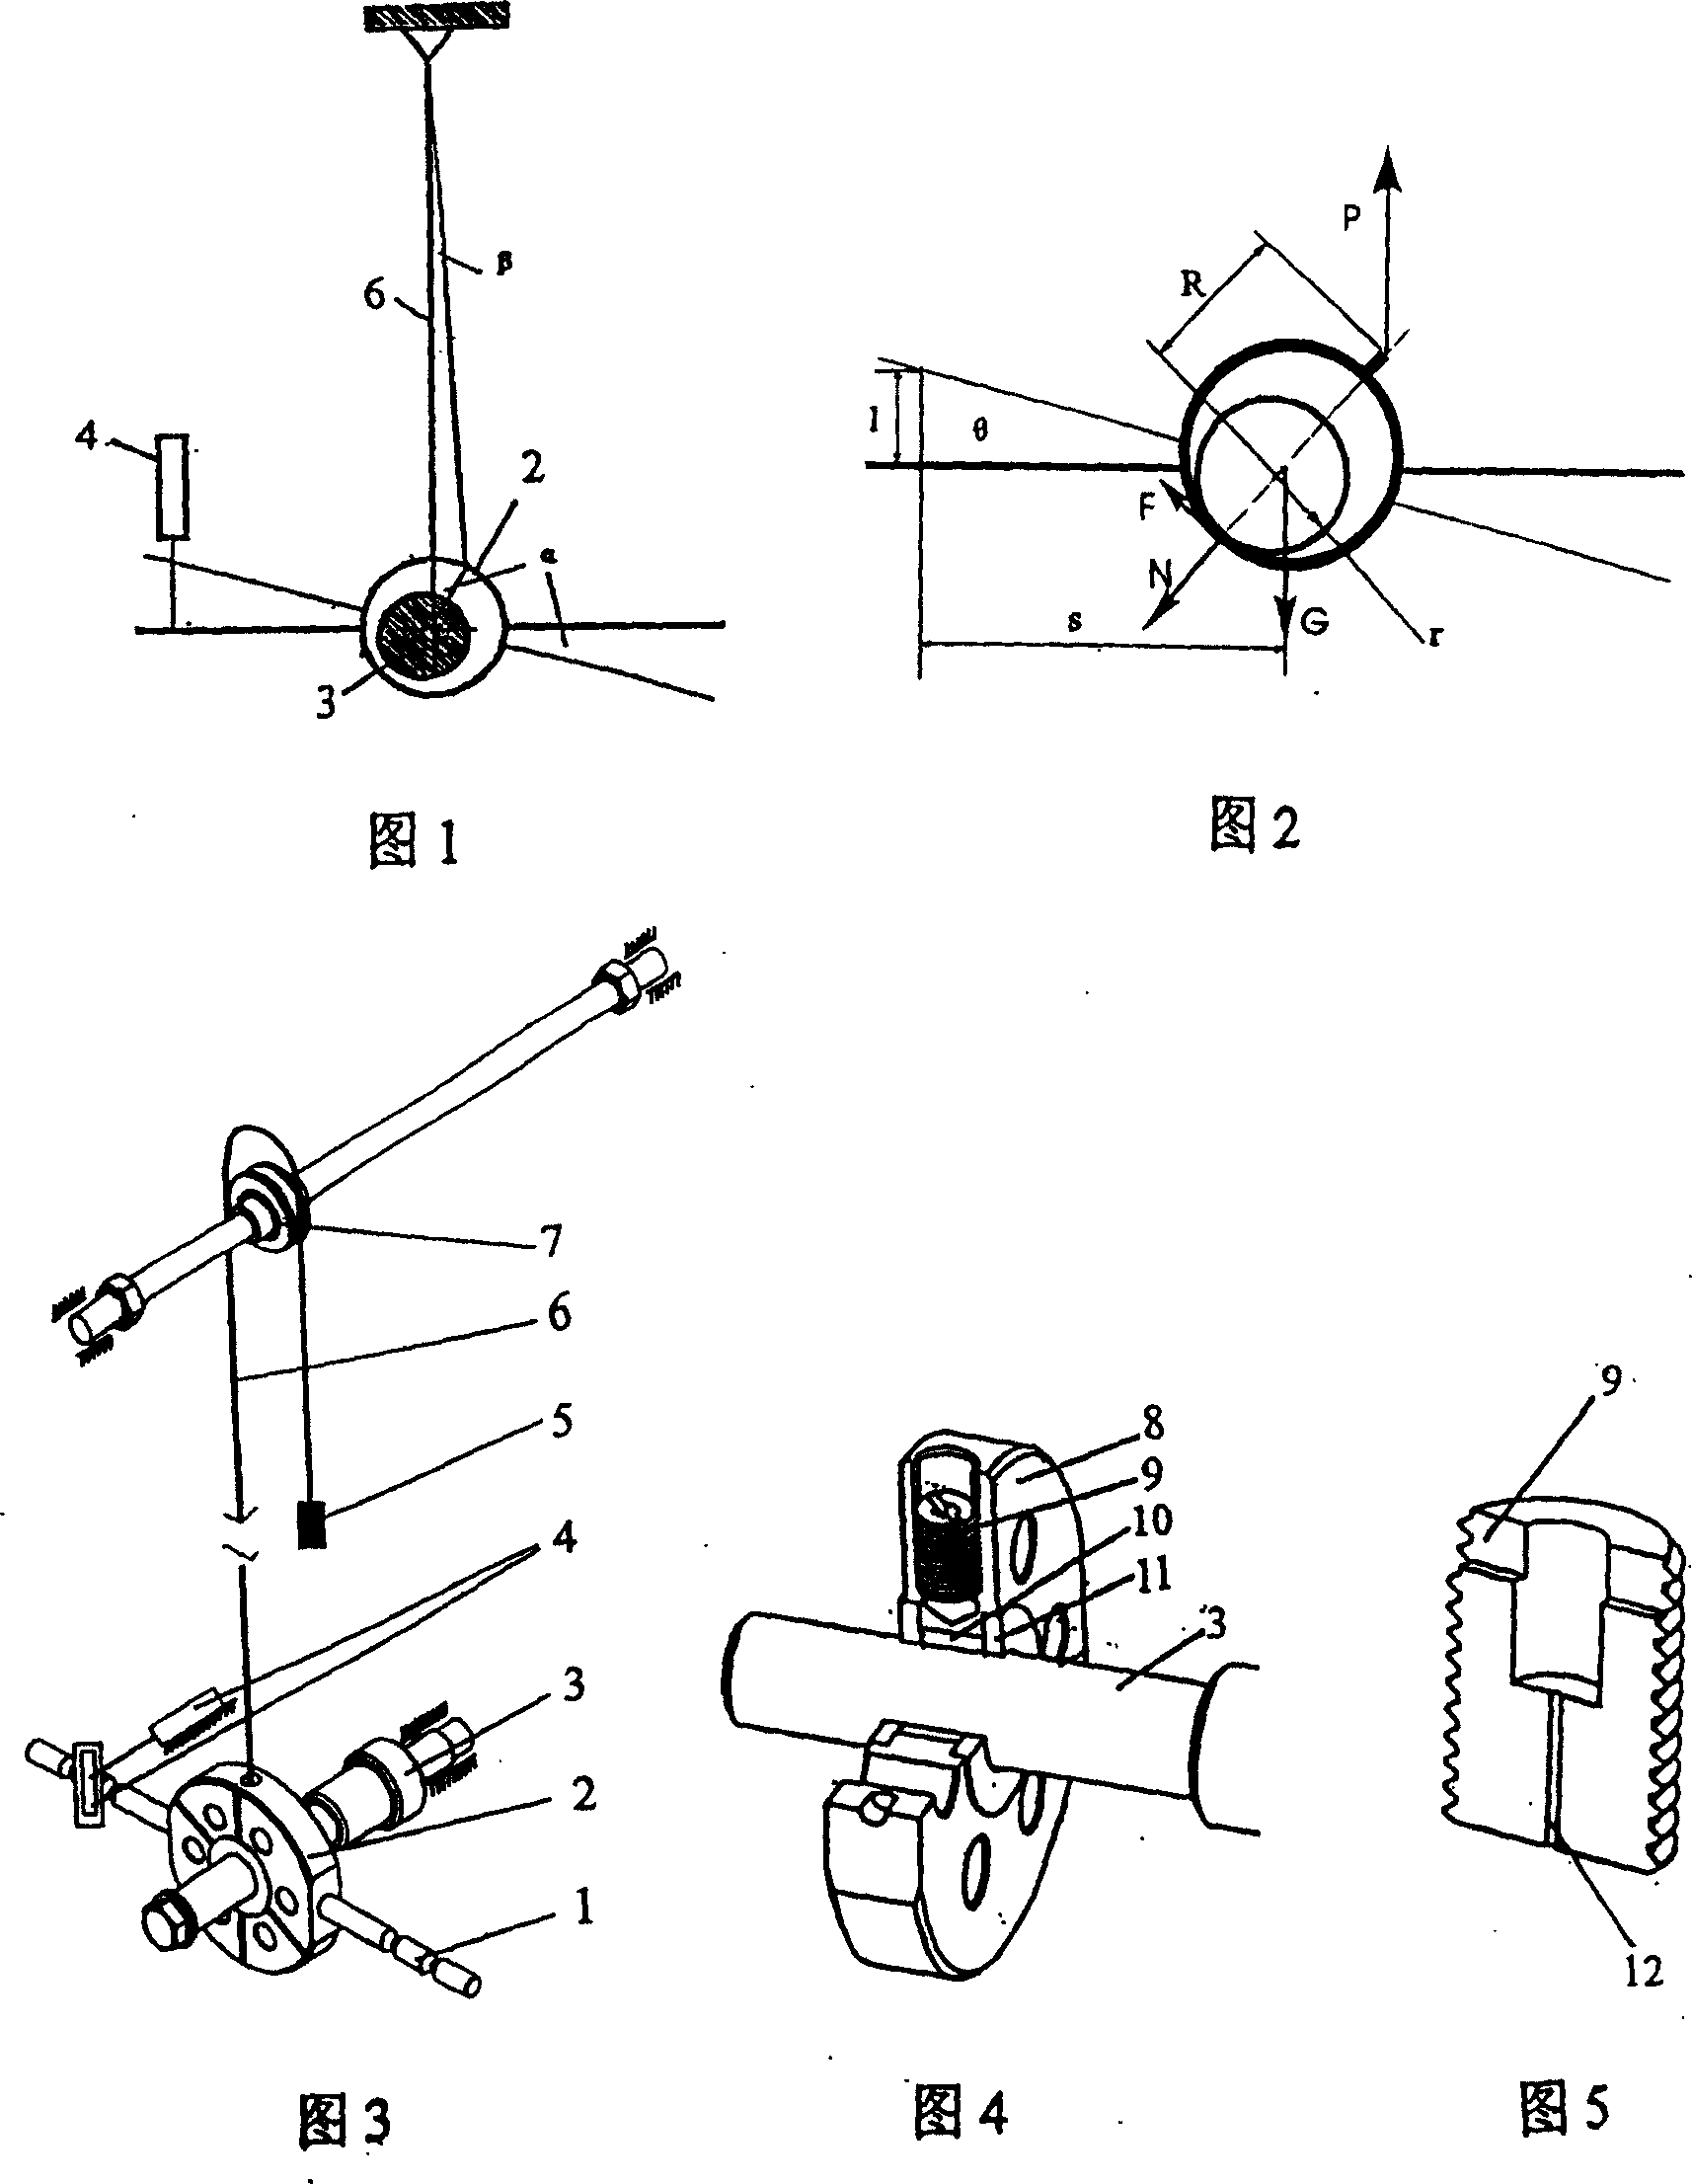 Device for measuring friction force of bearing under tiny load